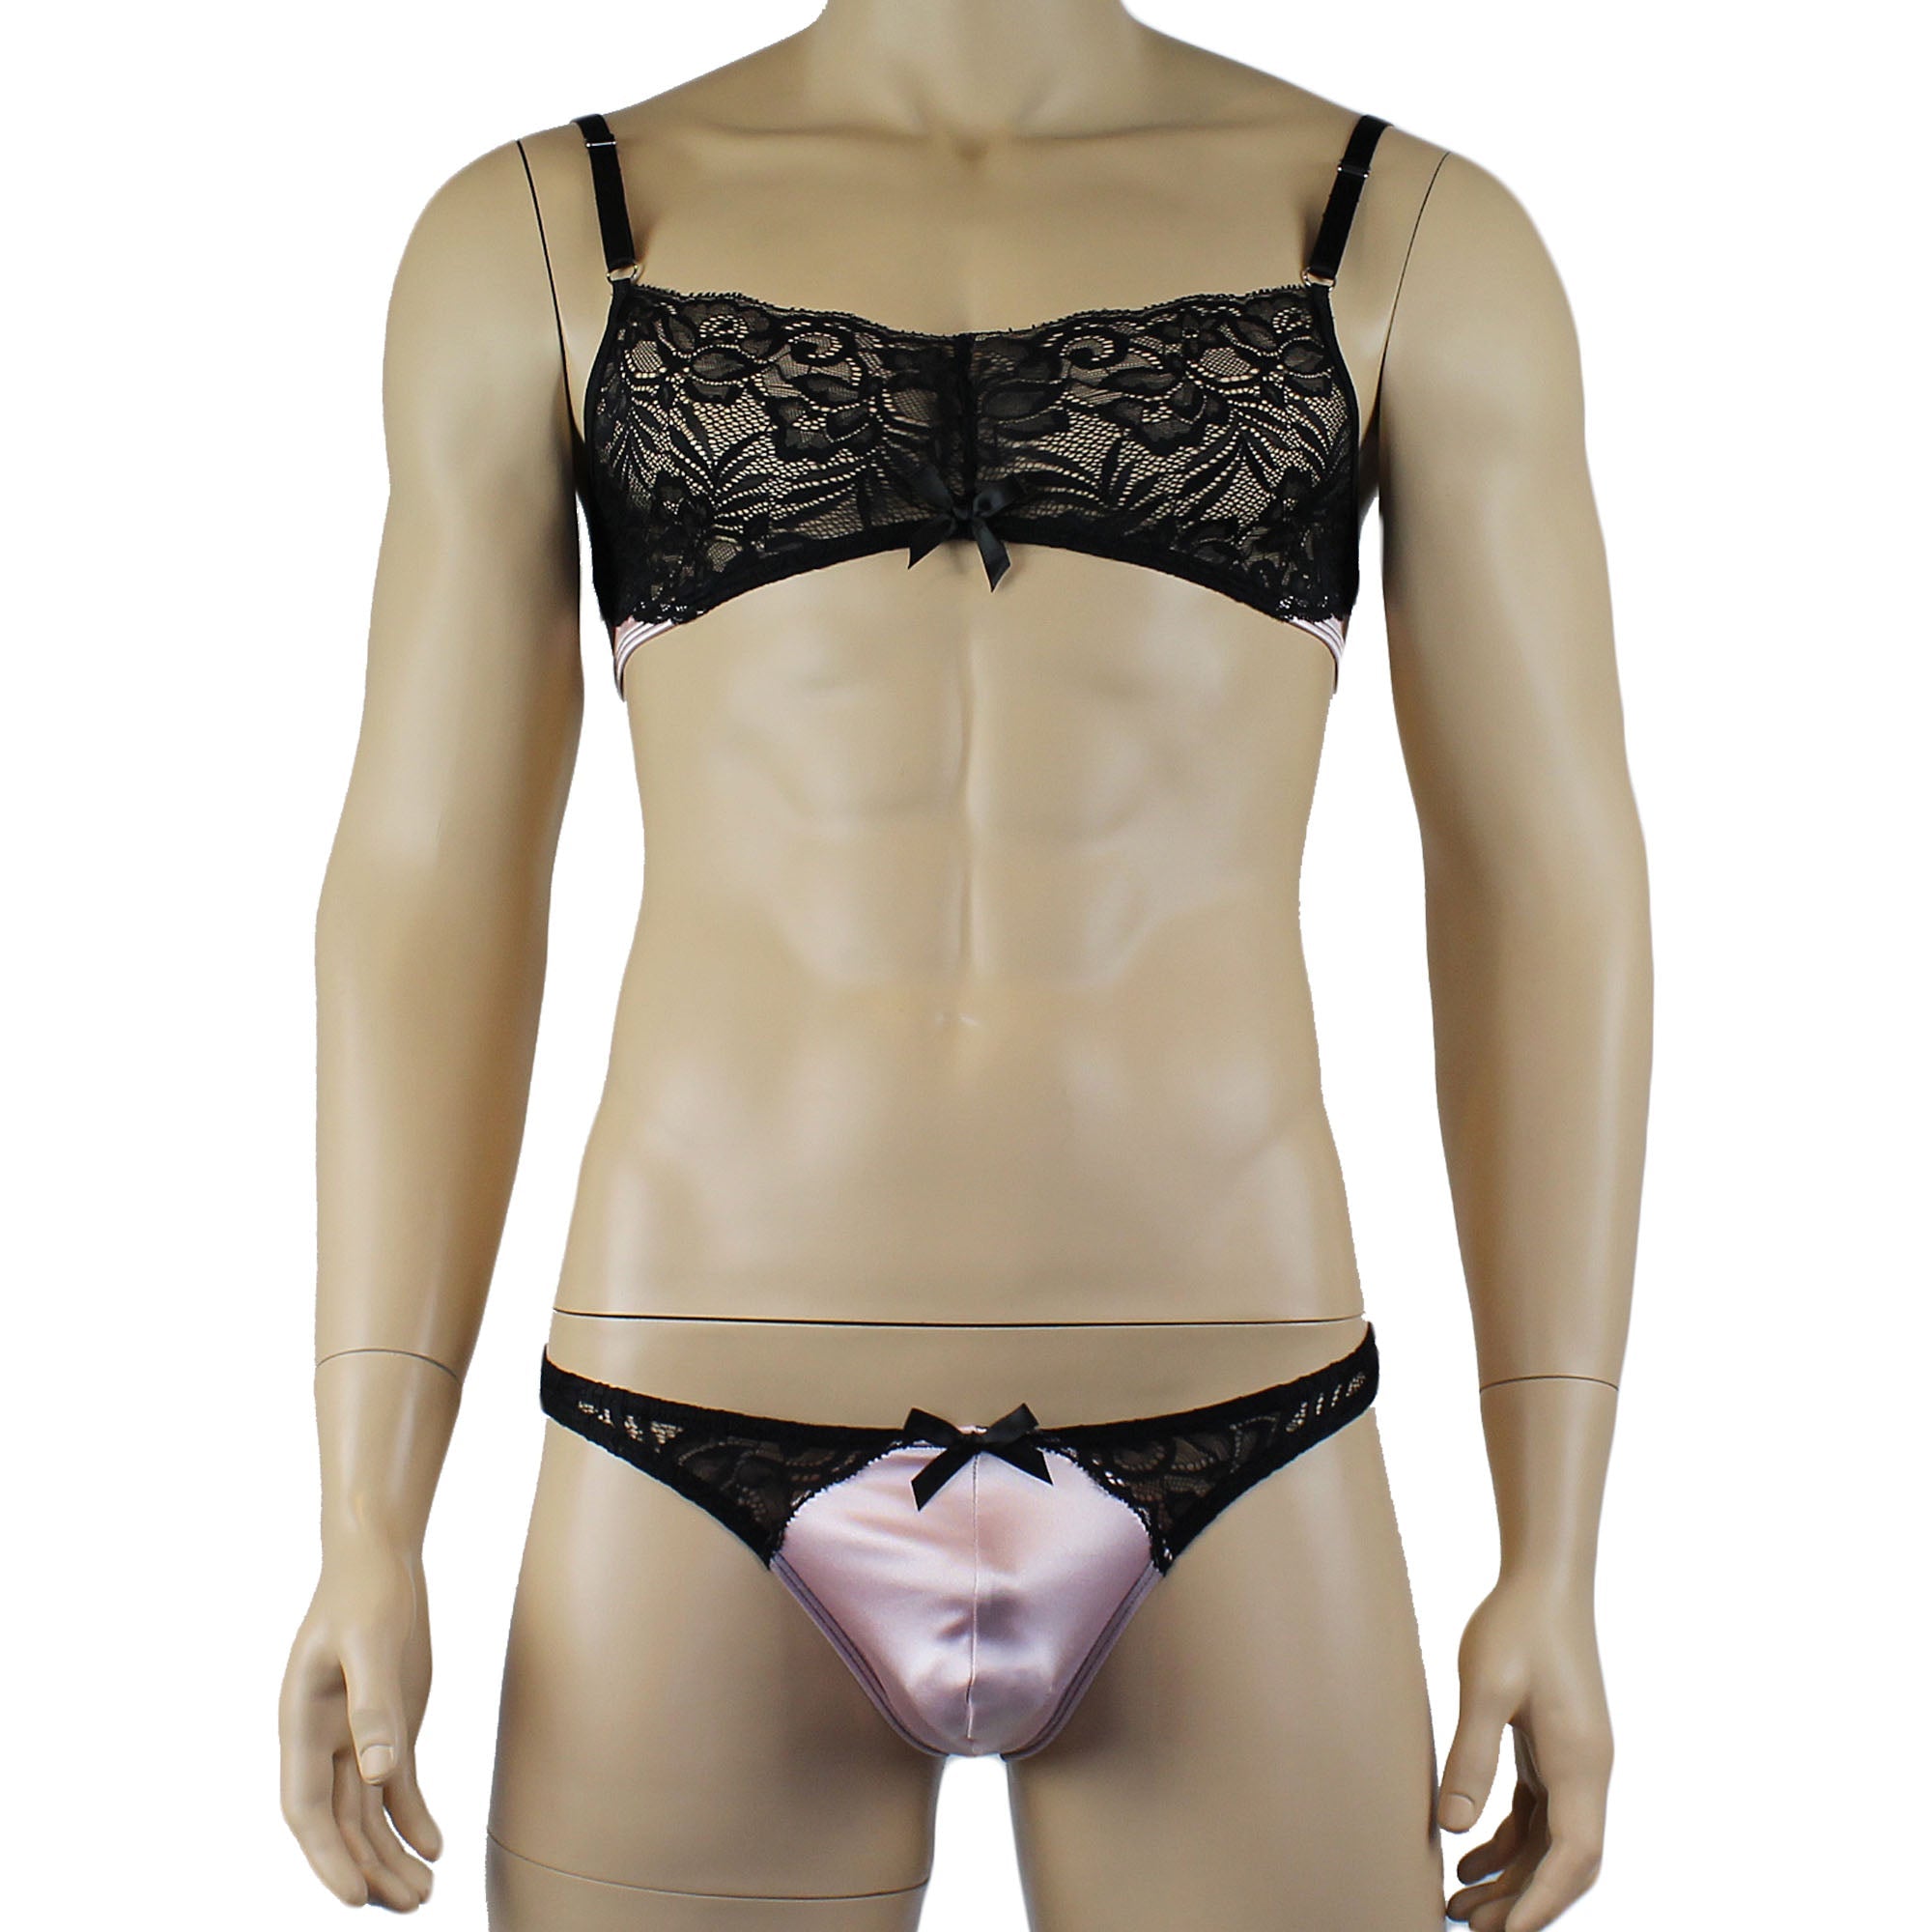 Mens Risque Bra Top and Thong Light Pink and Black Lace